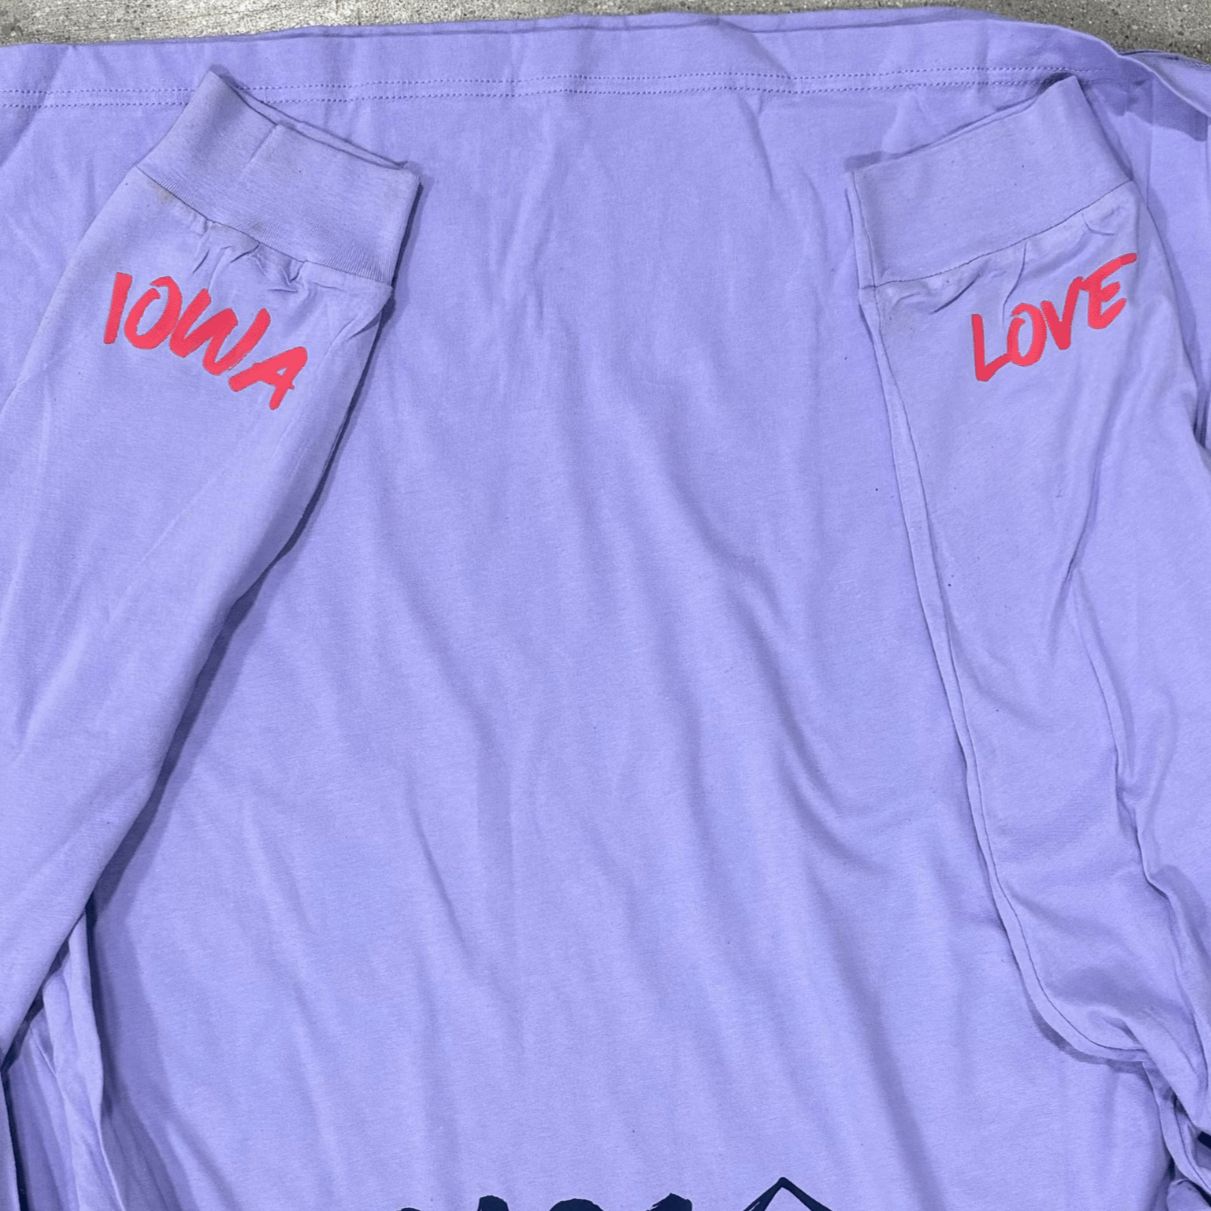 "Iowa love" Long Sleeve in Lavendar with Cuff Message